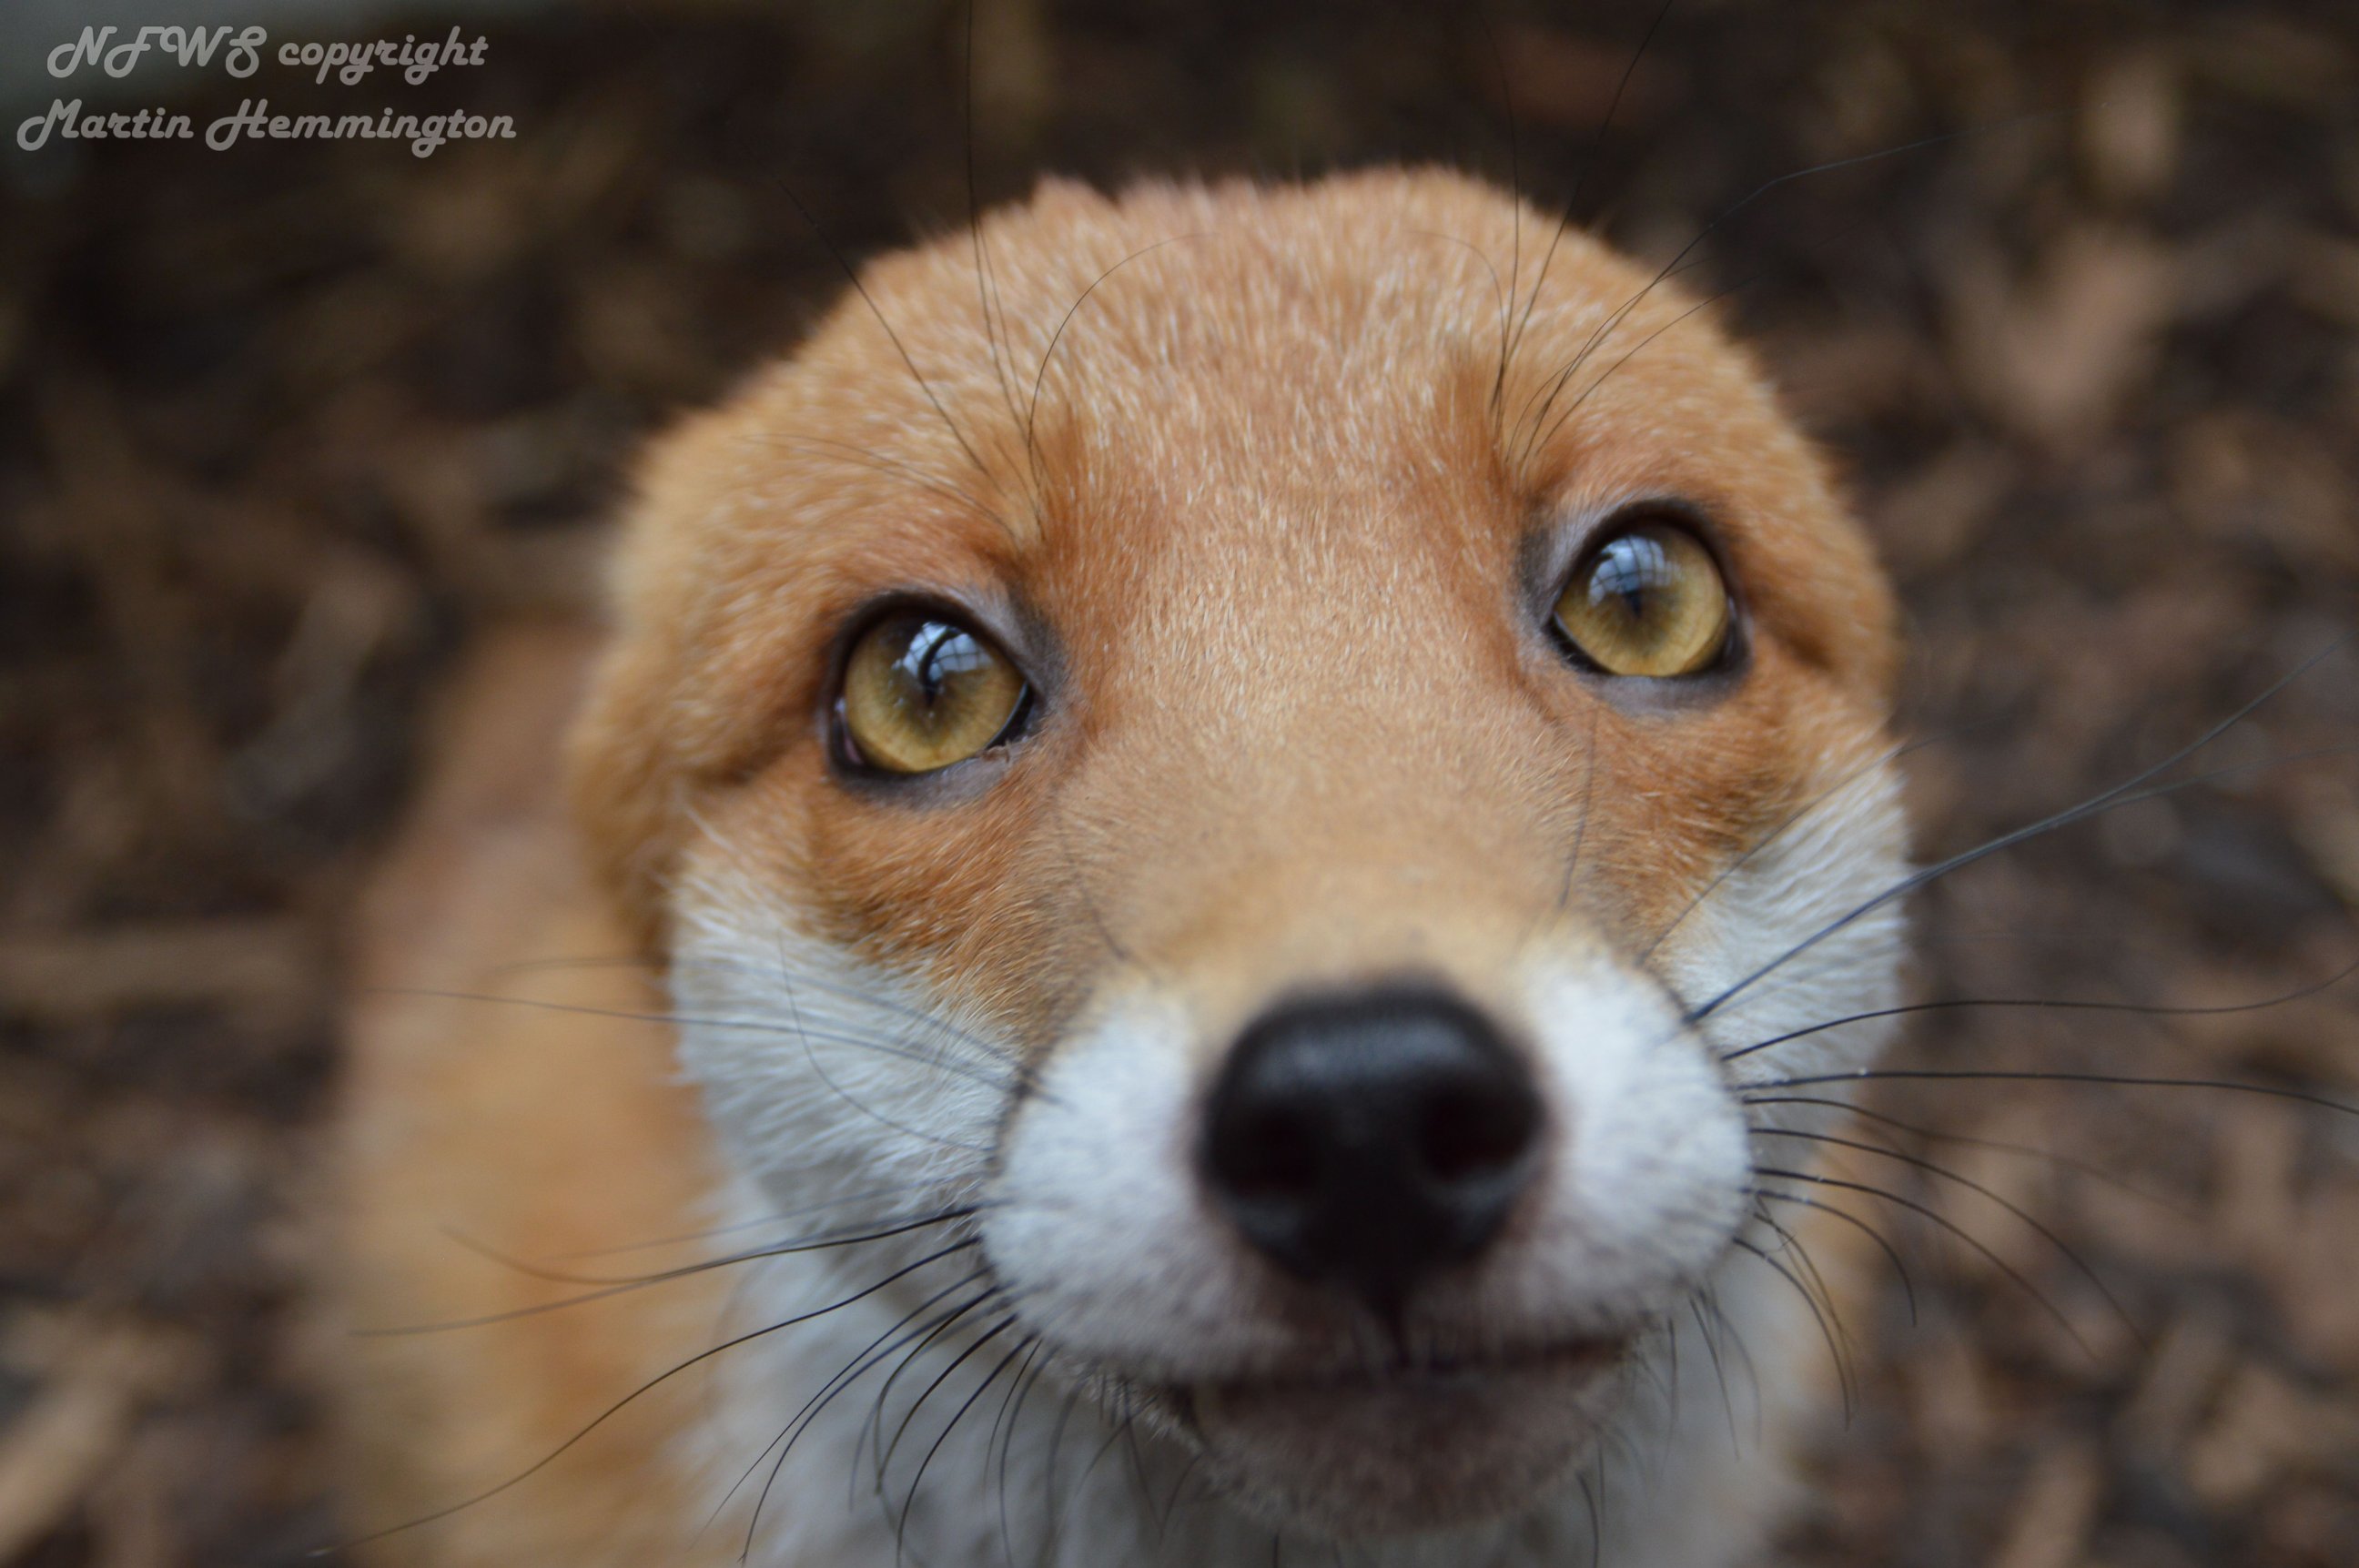 PHOTO: The National Fox Welfare Society said Pudding is too friendly to be released back into the wild.  